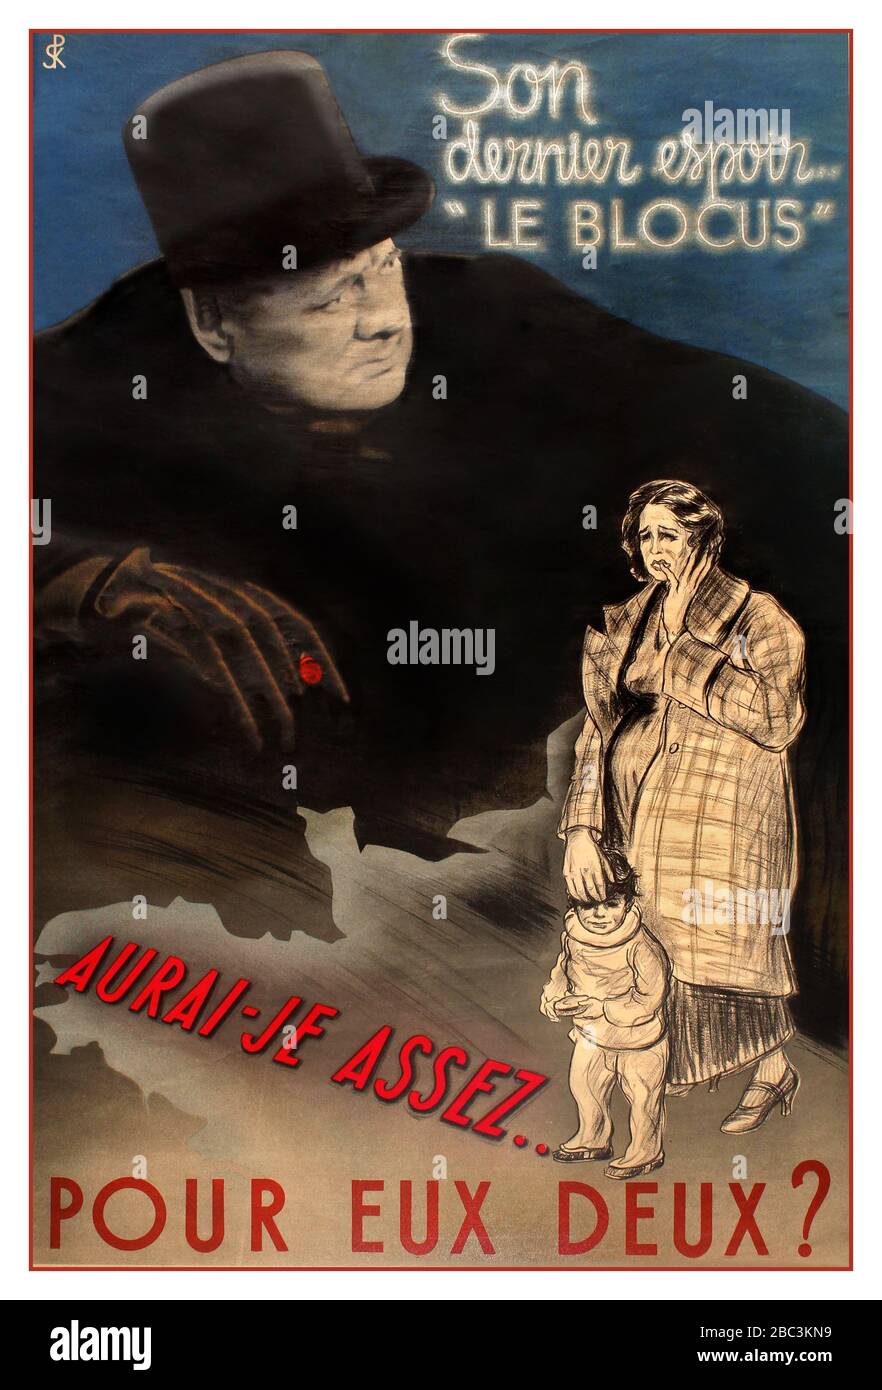 Original WW2 vintage anti-British propaganda poster issued in Nazi occupied France during World War Two - Son Dernier Espoir Le Blocus - Aurai-je assez ... pour eux deux? / His Last Hope The Blockade - Will I have enough for them both? - featuring illustration of malnourished pregnant lady and her young child standing on map of France which is dominated by somber image of Winston Churchill (Winston Leonard Spencer-Churchill 1874-1965; Prime Minister 1940-1945 and 1951-1955) with hat and smoking a cigar with a gloved hand, Occupied France,  1940 Graphic design, SPK Stock Photo